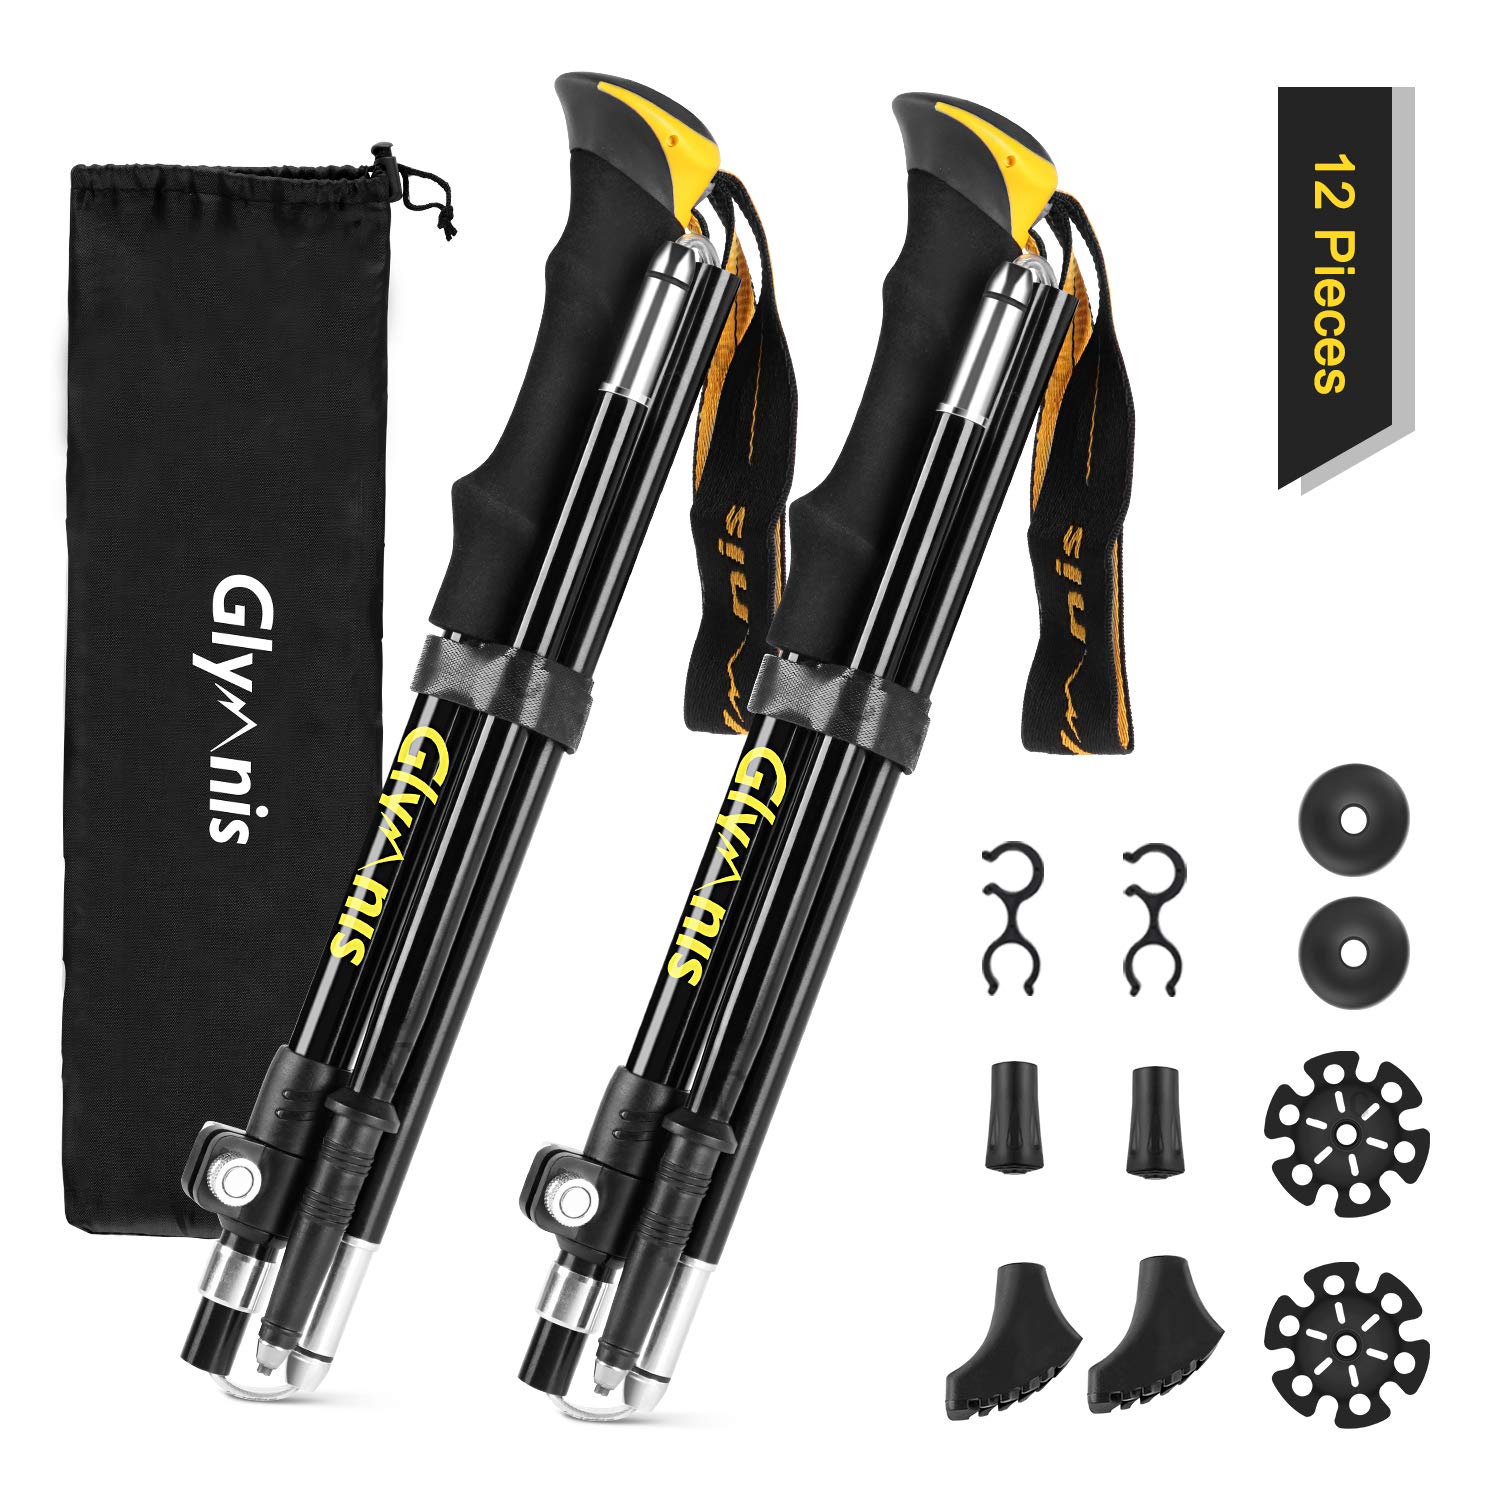 Glymnis Collapsible Hiking Poles